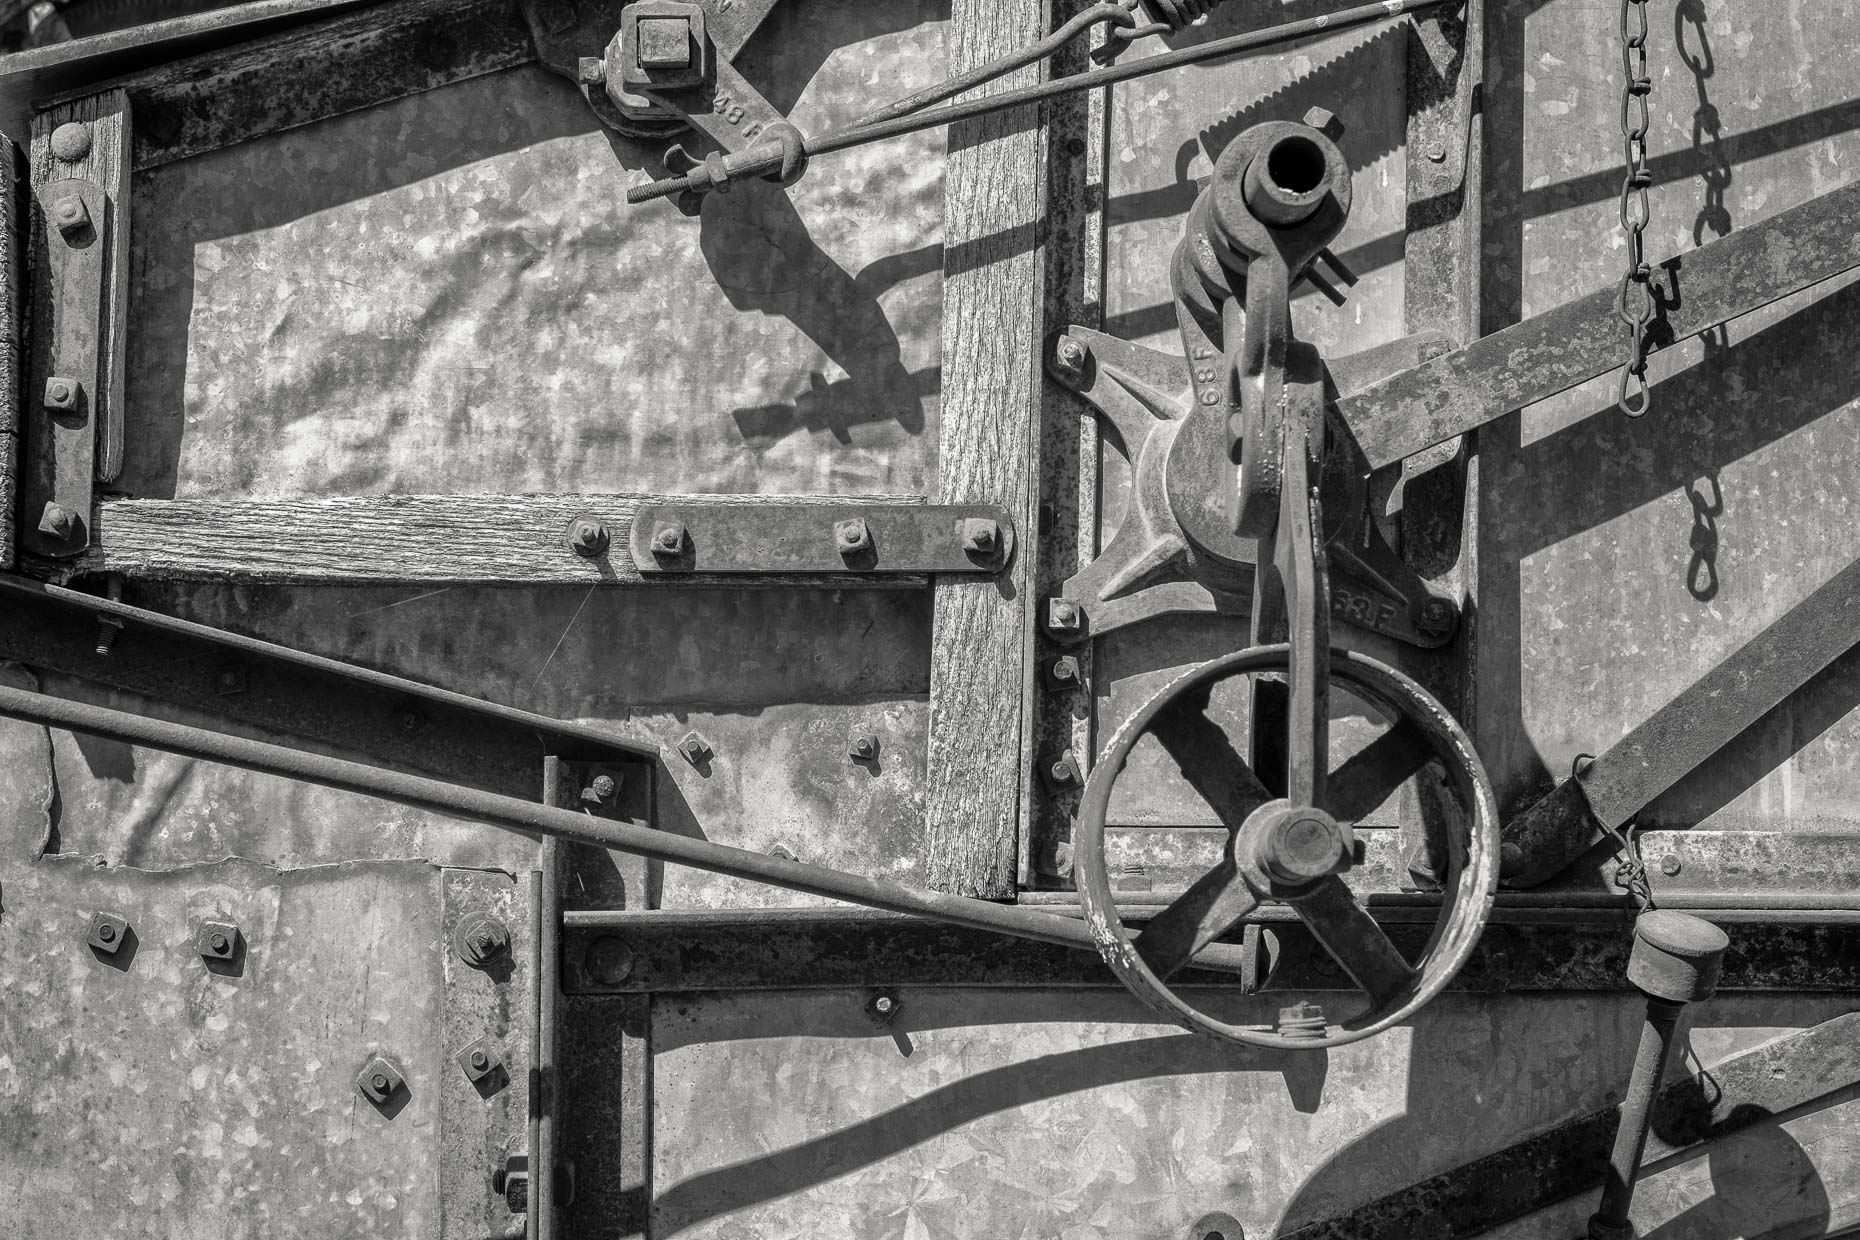 Vintage Farm Equipment Abstract in B&W